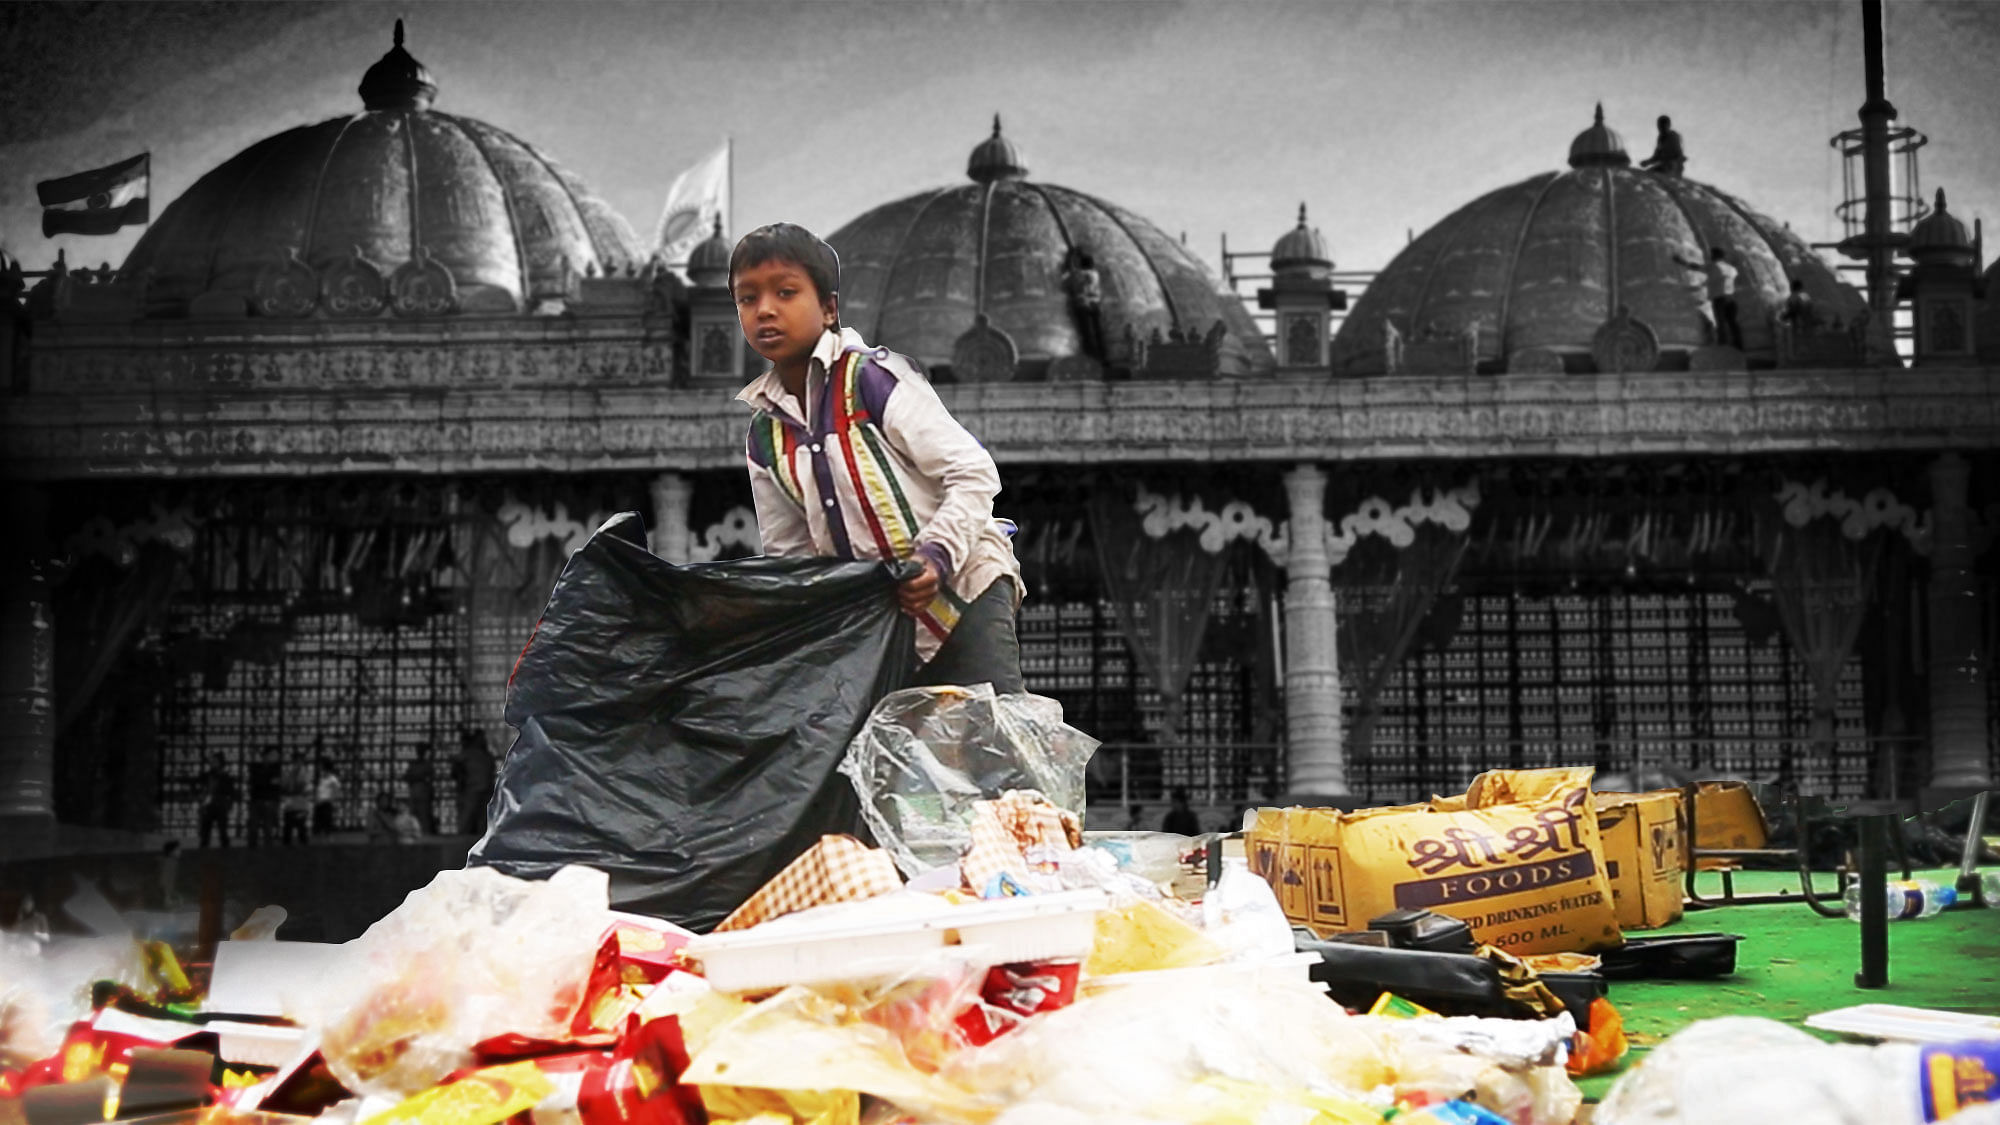 Rag-pickers sort through trash left behind by Art of Living devotees. (Photo: Altered by <b>The Quint</b>)